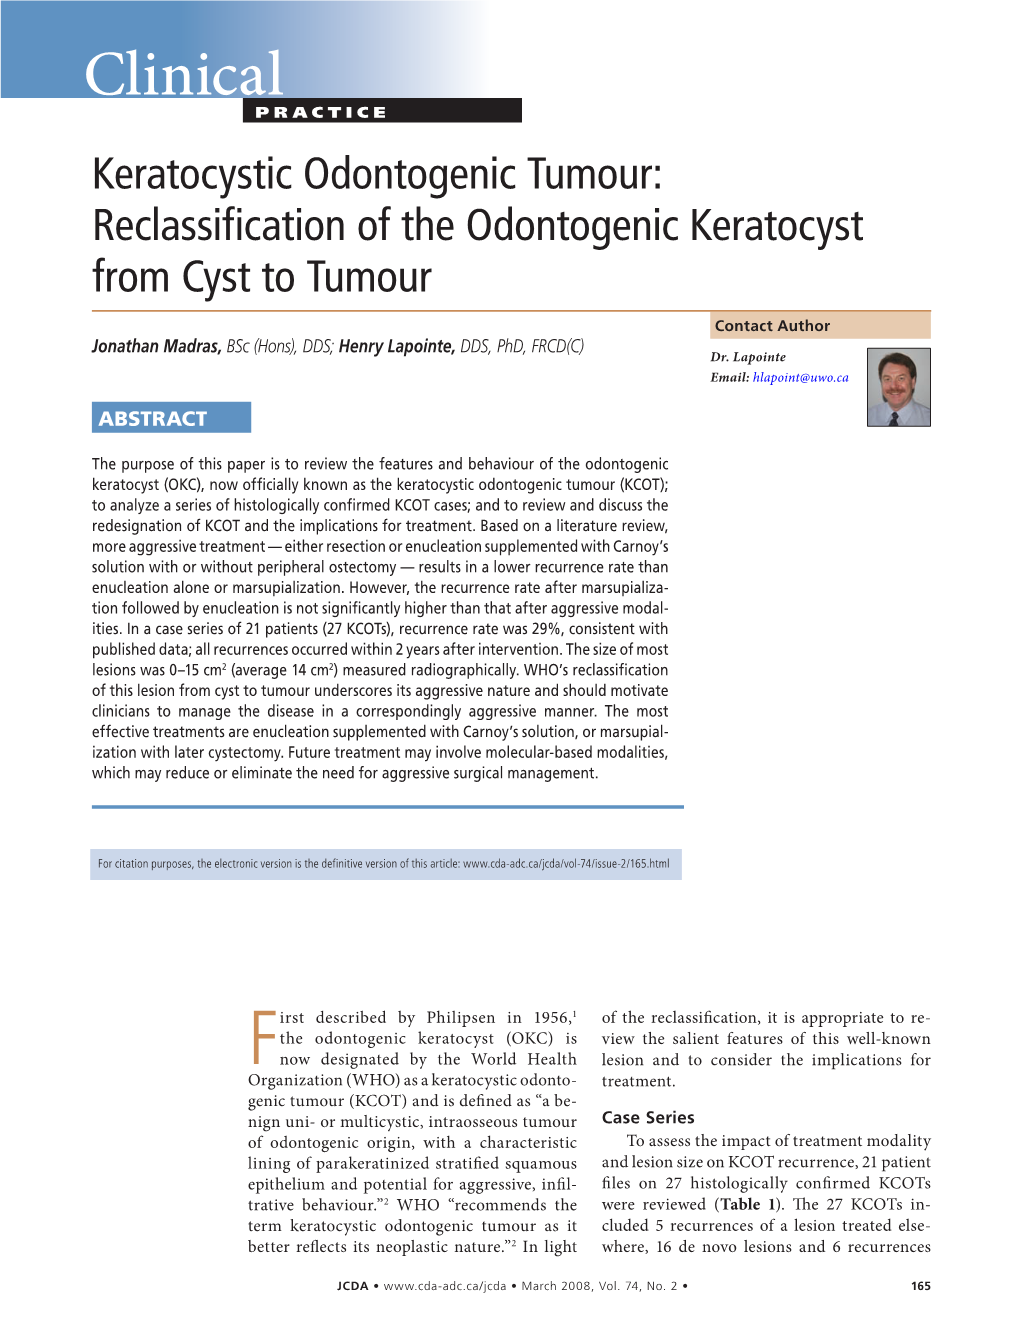 Reclassification of the Odontogenic Keratocyst from Cyst to Tumour